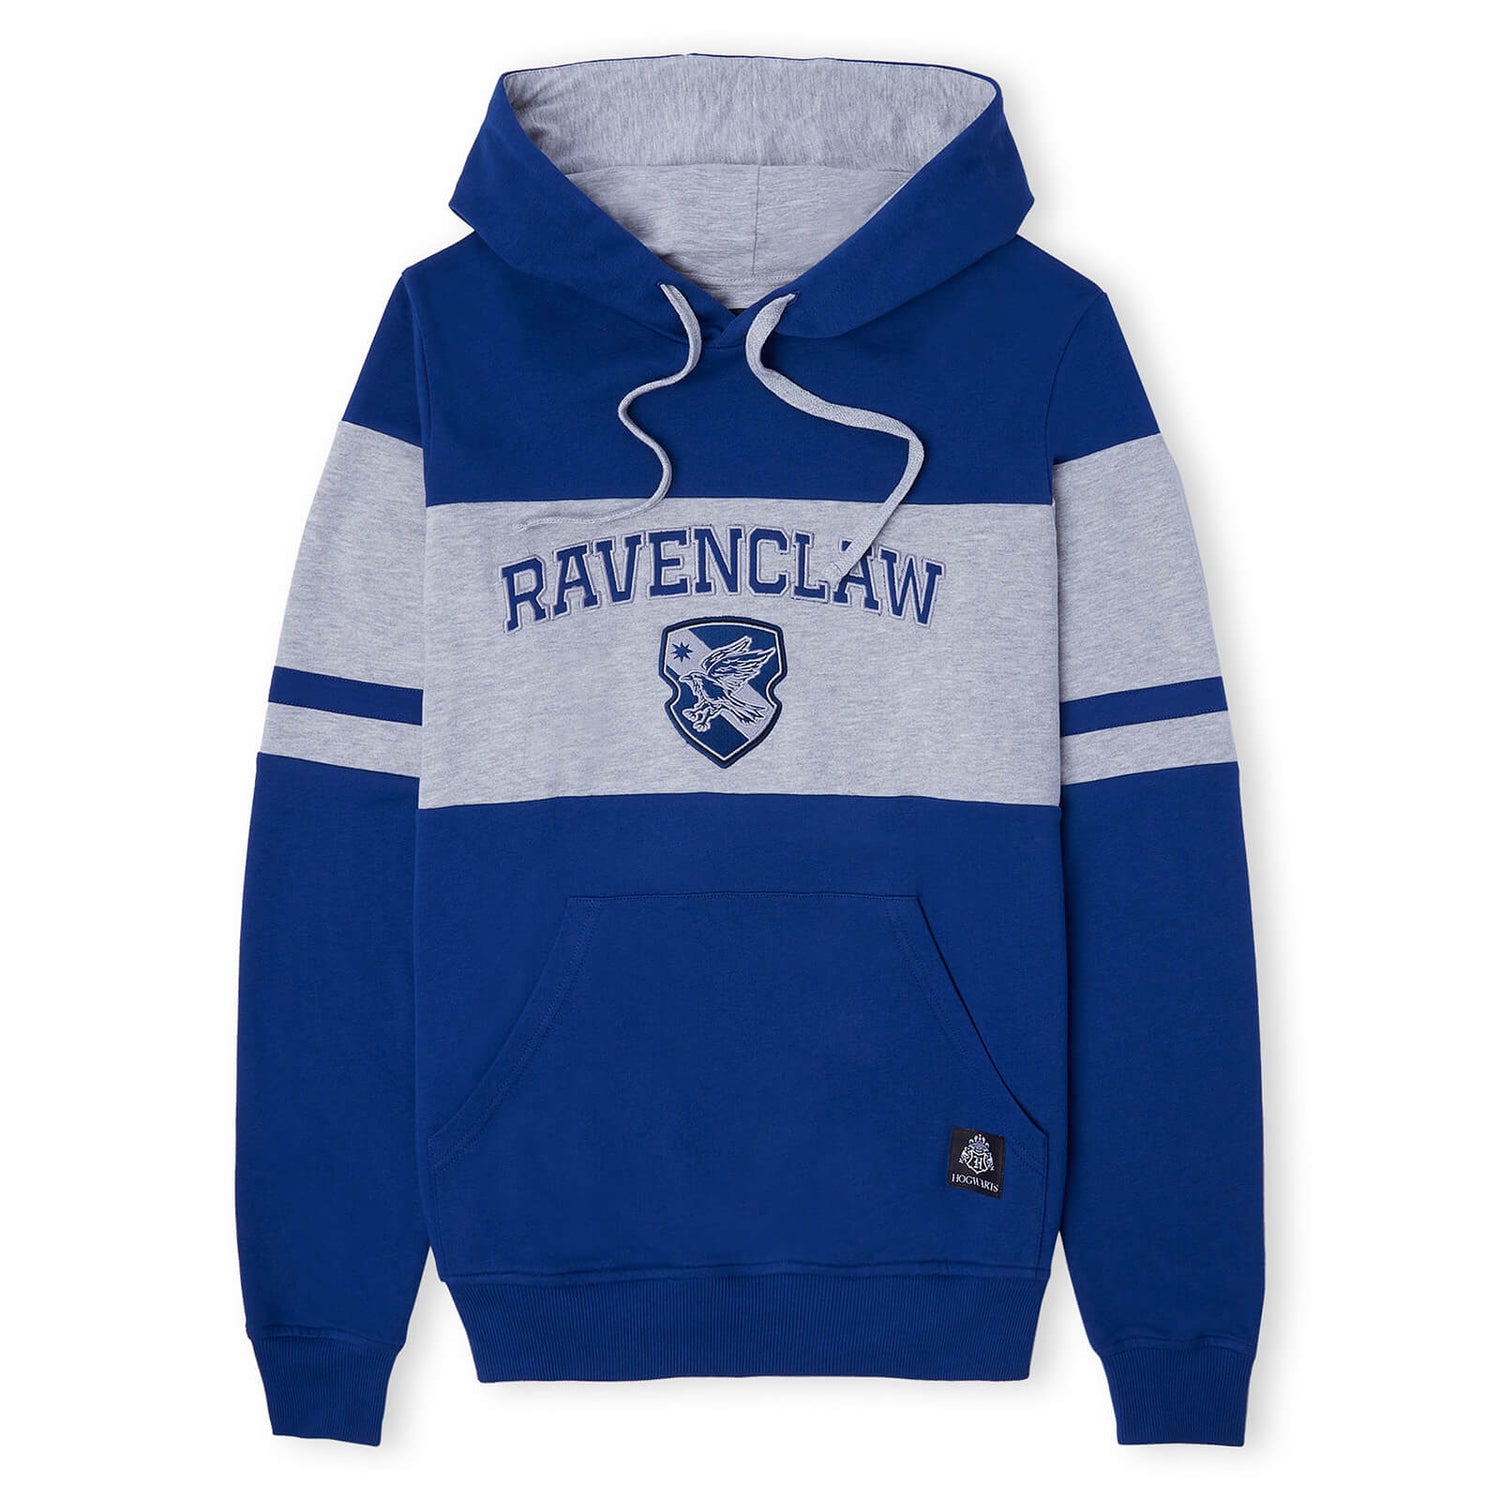 Ravenclaw House Panelled Hoodie - Navy